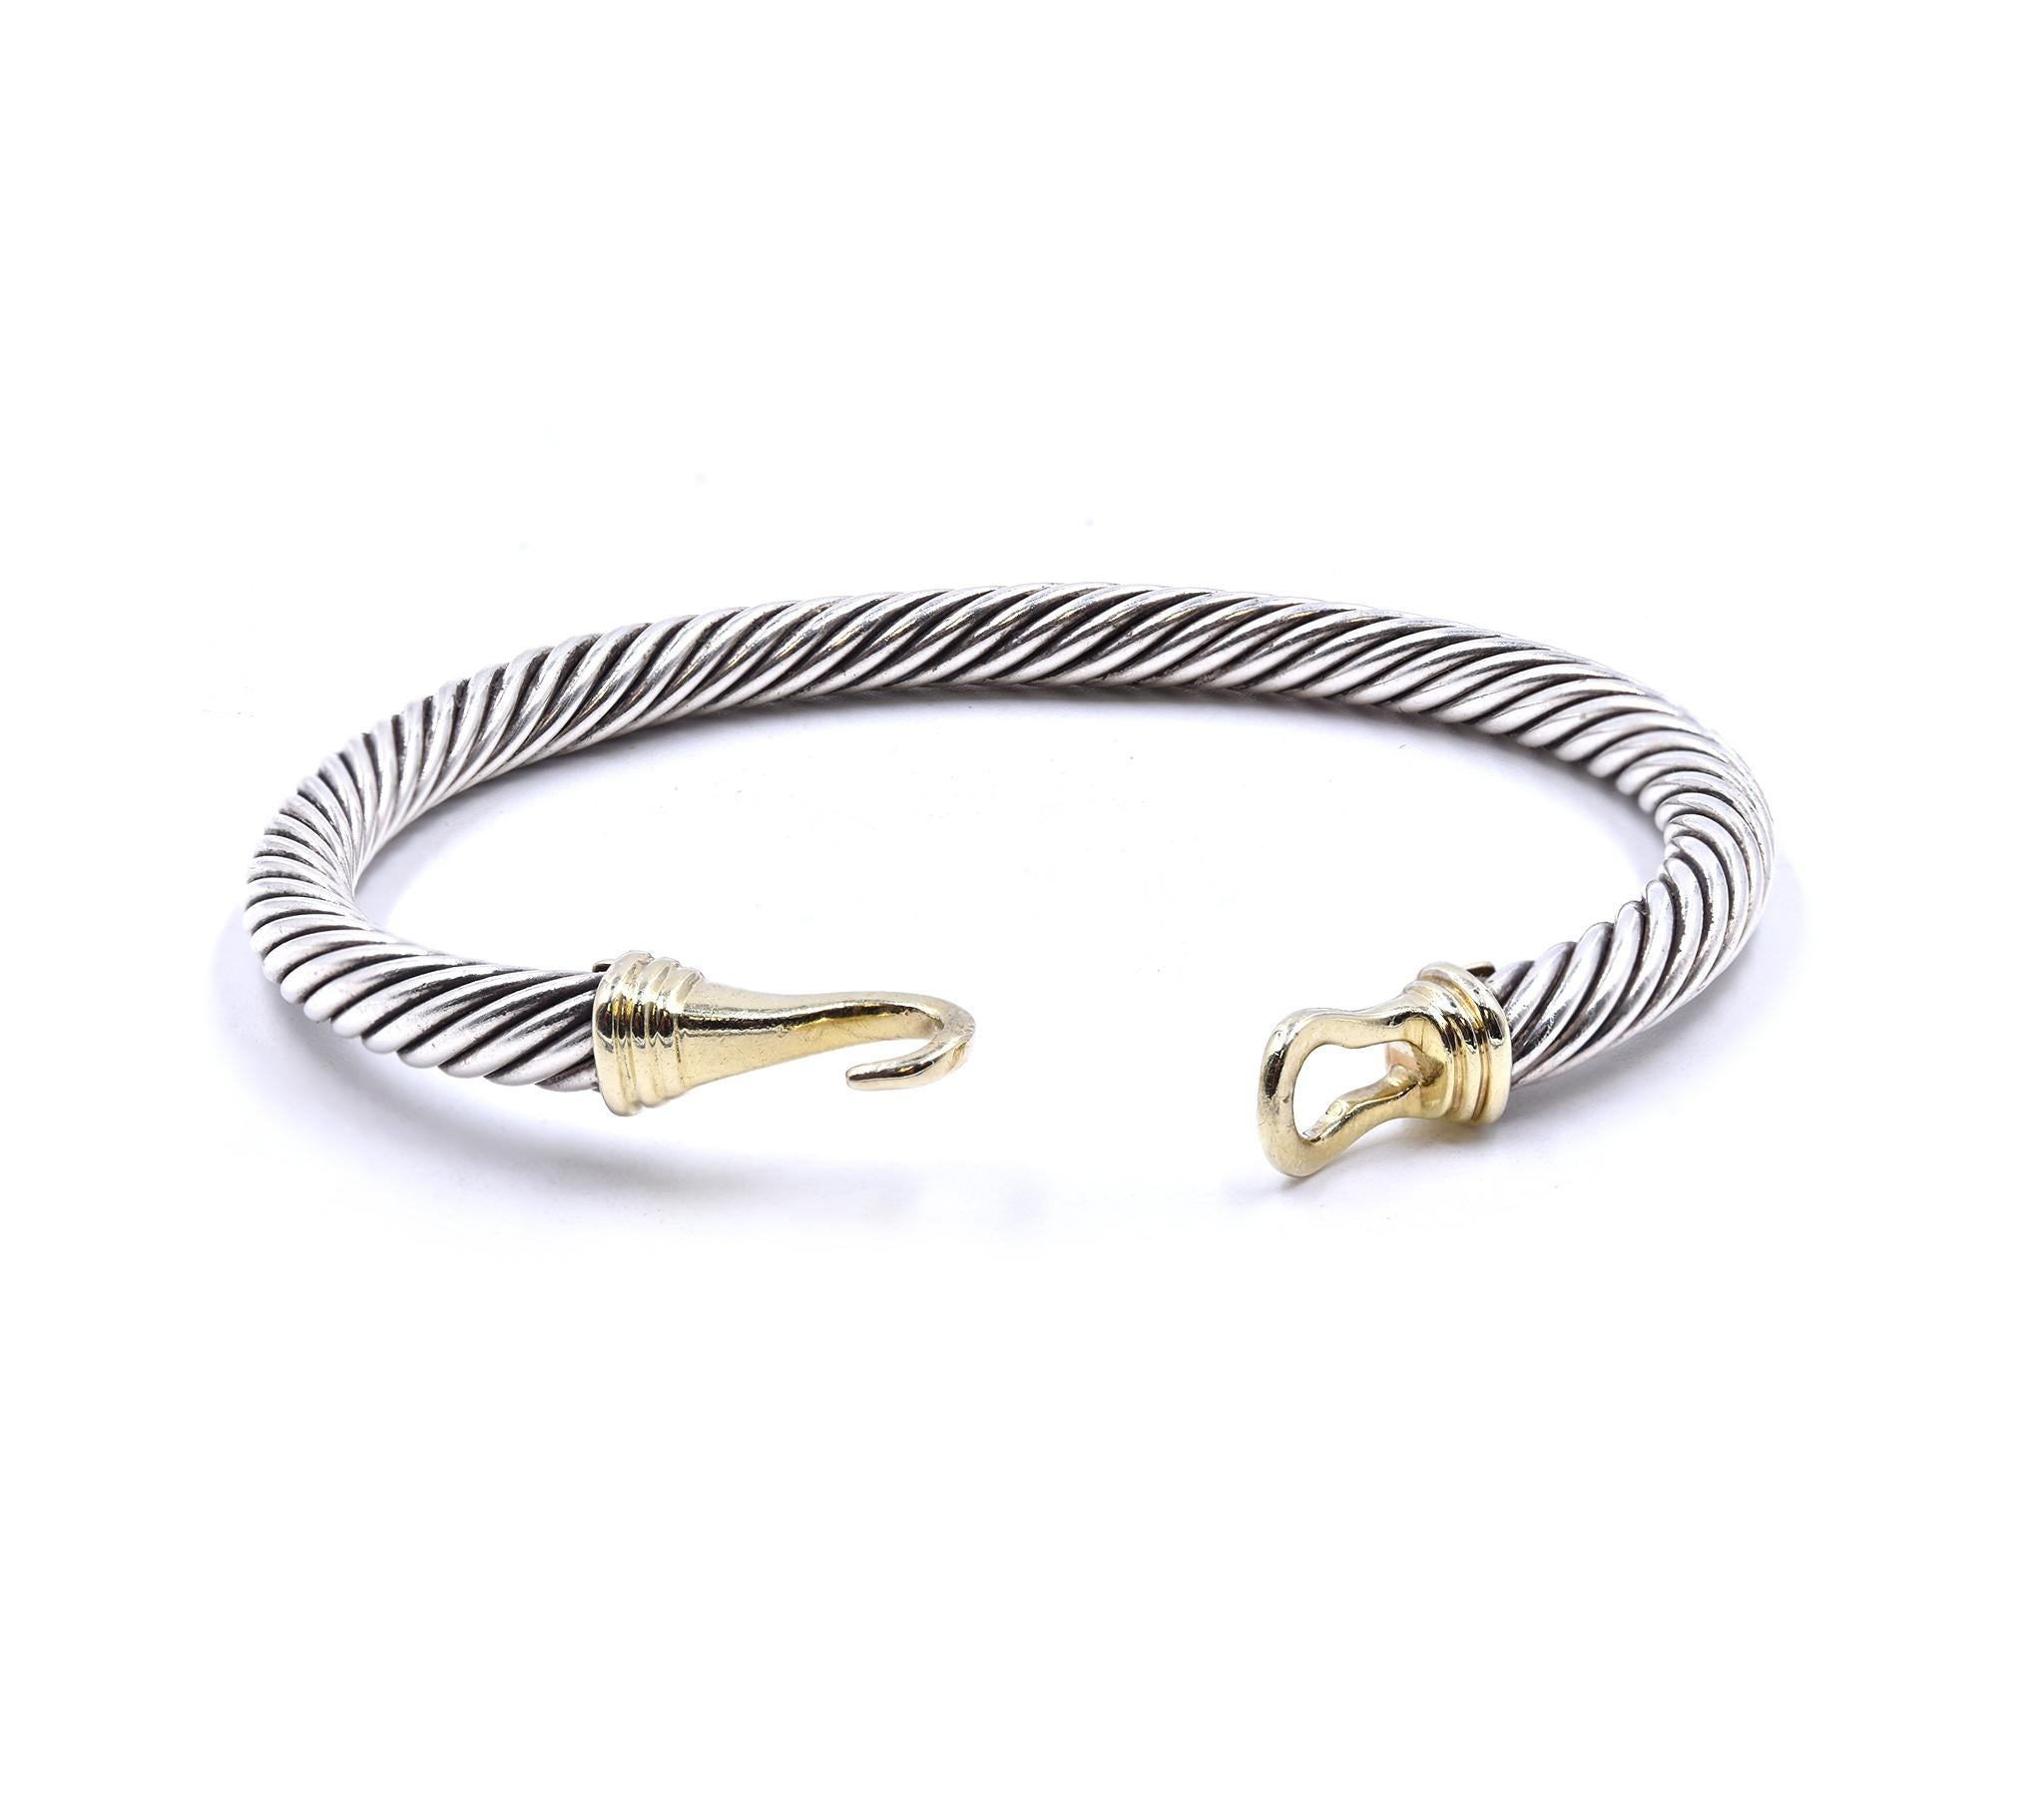 Designer: David Yurman
Material: sterling silver / 14K yellow gold
Weight: 27.19 grams
Measurement: bracelet will fit up to a 6-inch wrist
